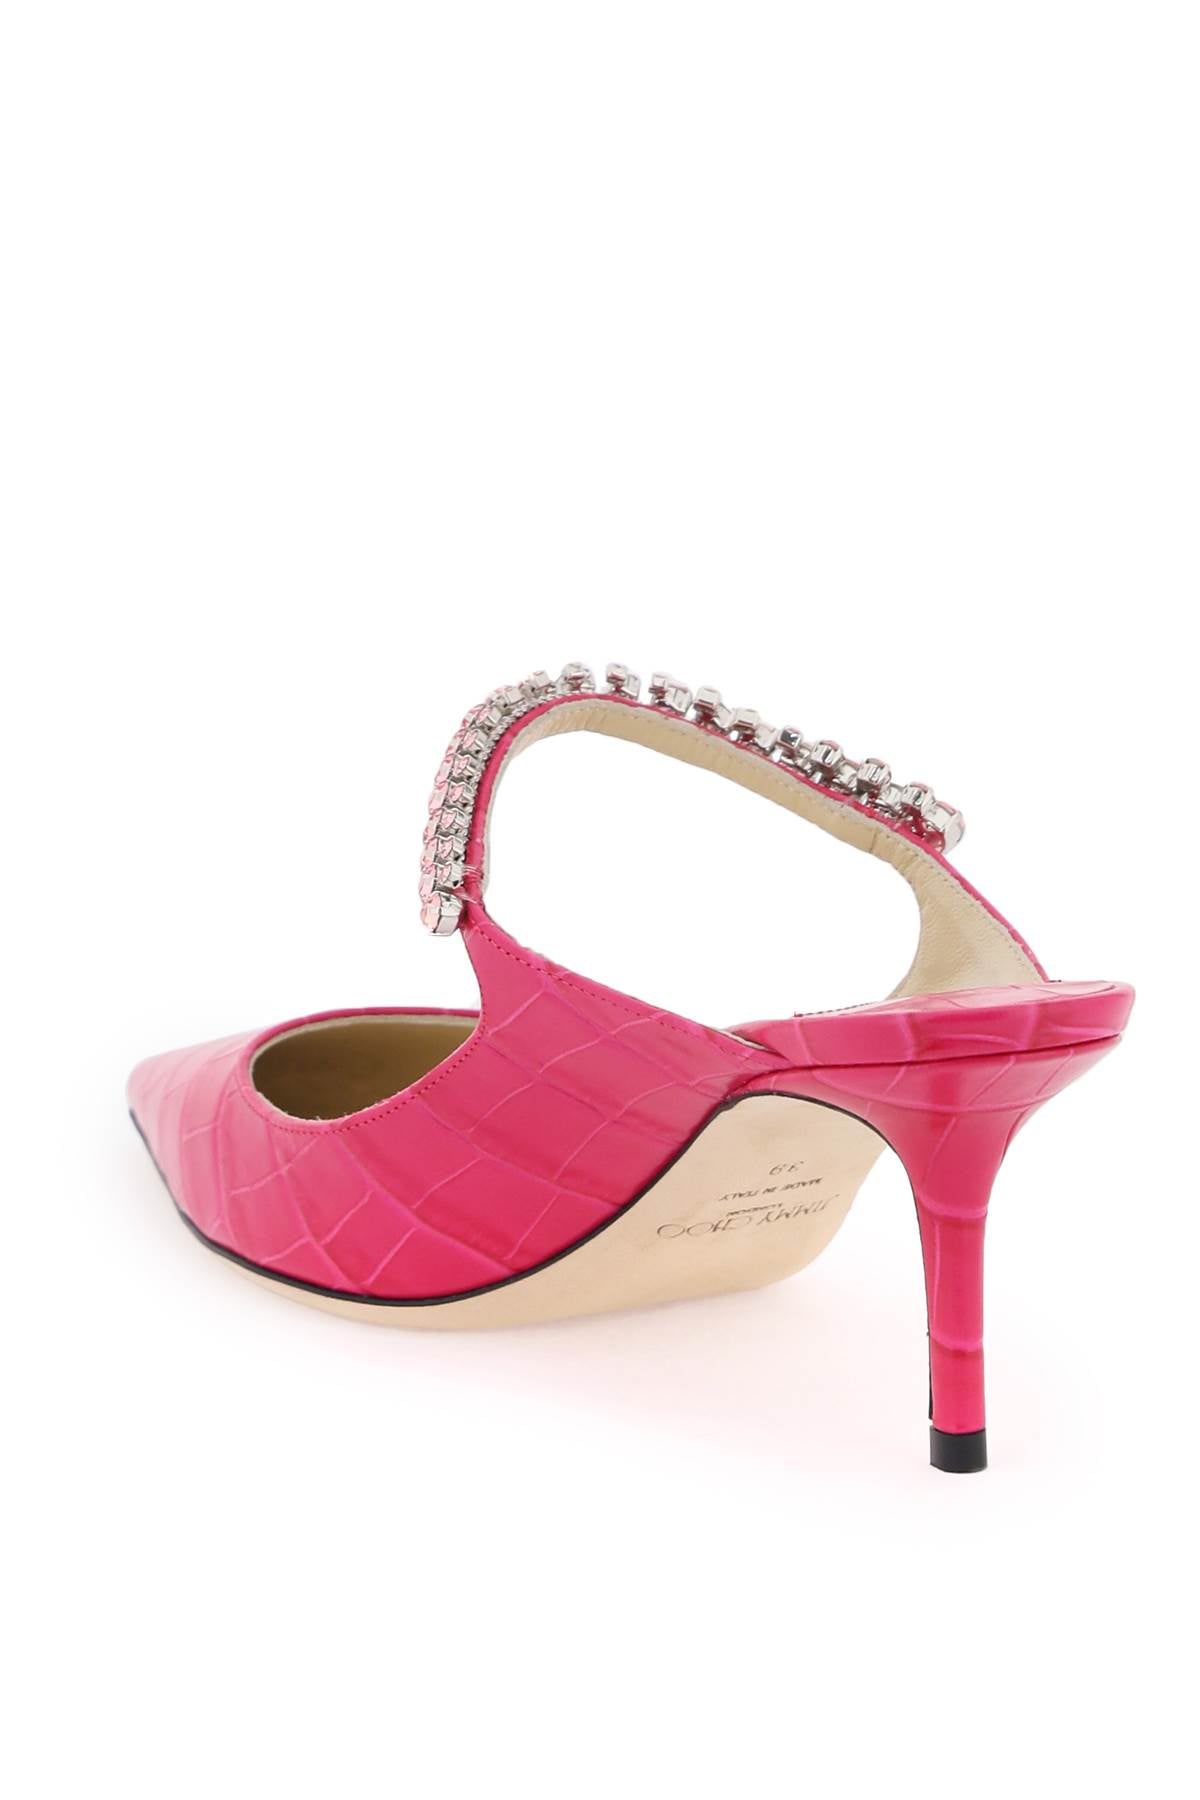 JIMMY CHOO Fuchsia Croc-Embossed Leather Flat for Women with Embedded Crystals and Covered Heel